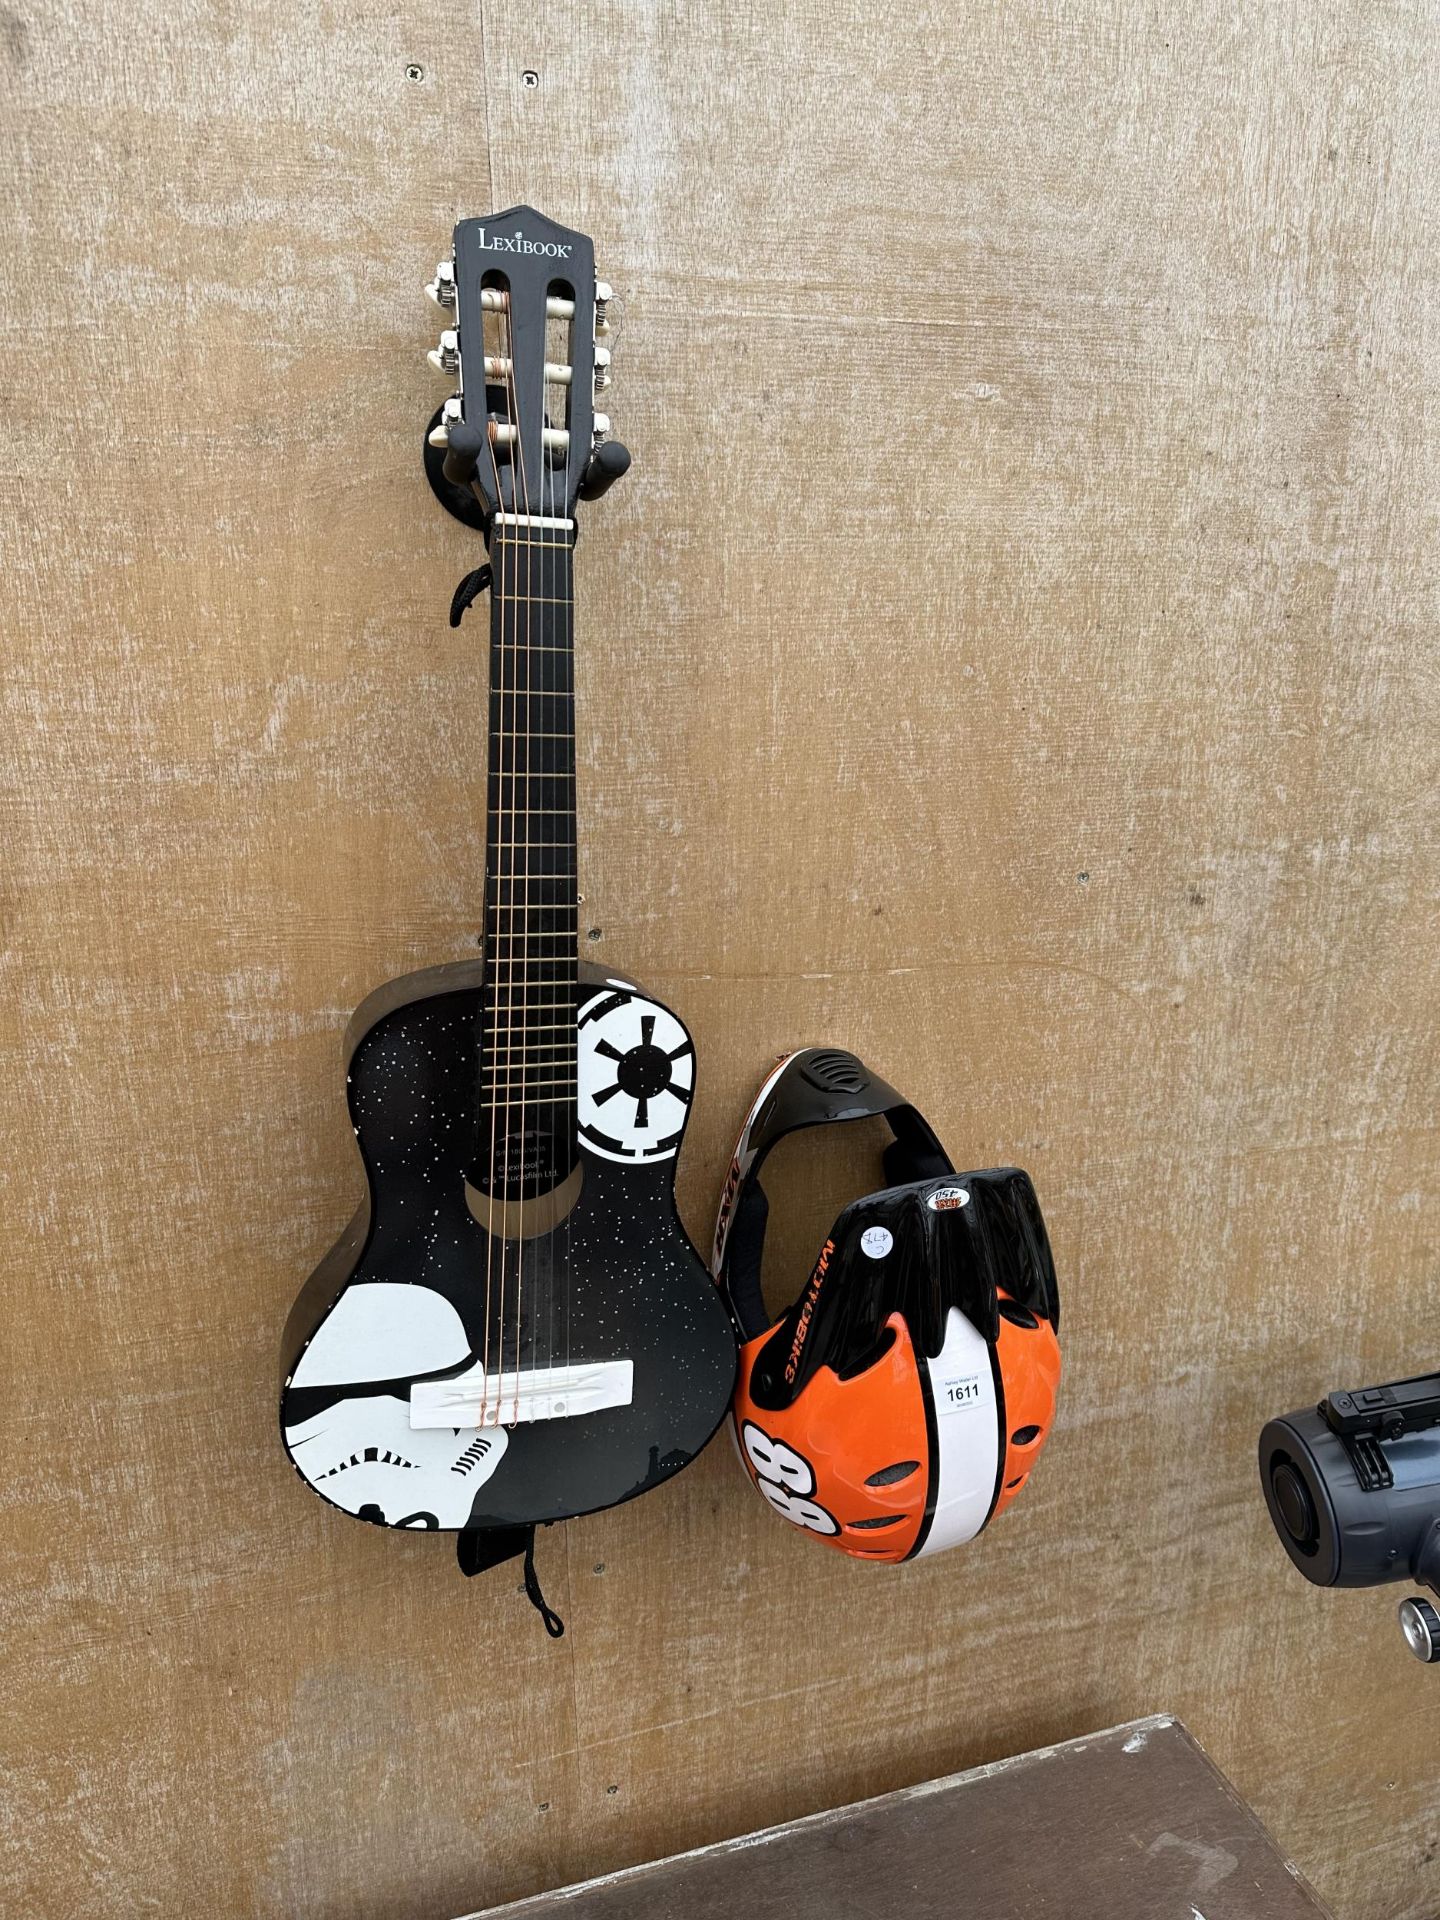 A LEXIBOOK CHILDS ACOUSTIC GUITAR AND A MOTOBIKE HELMET